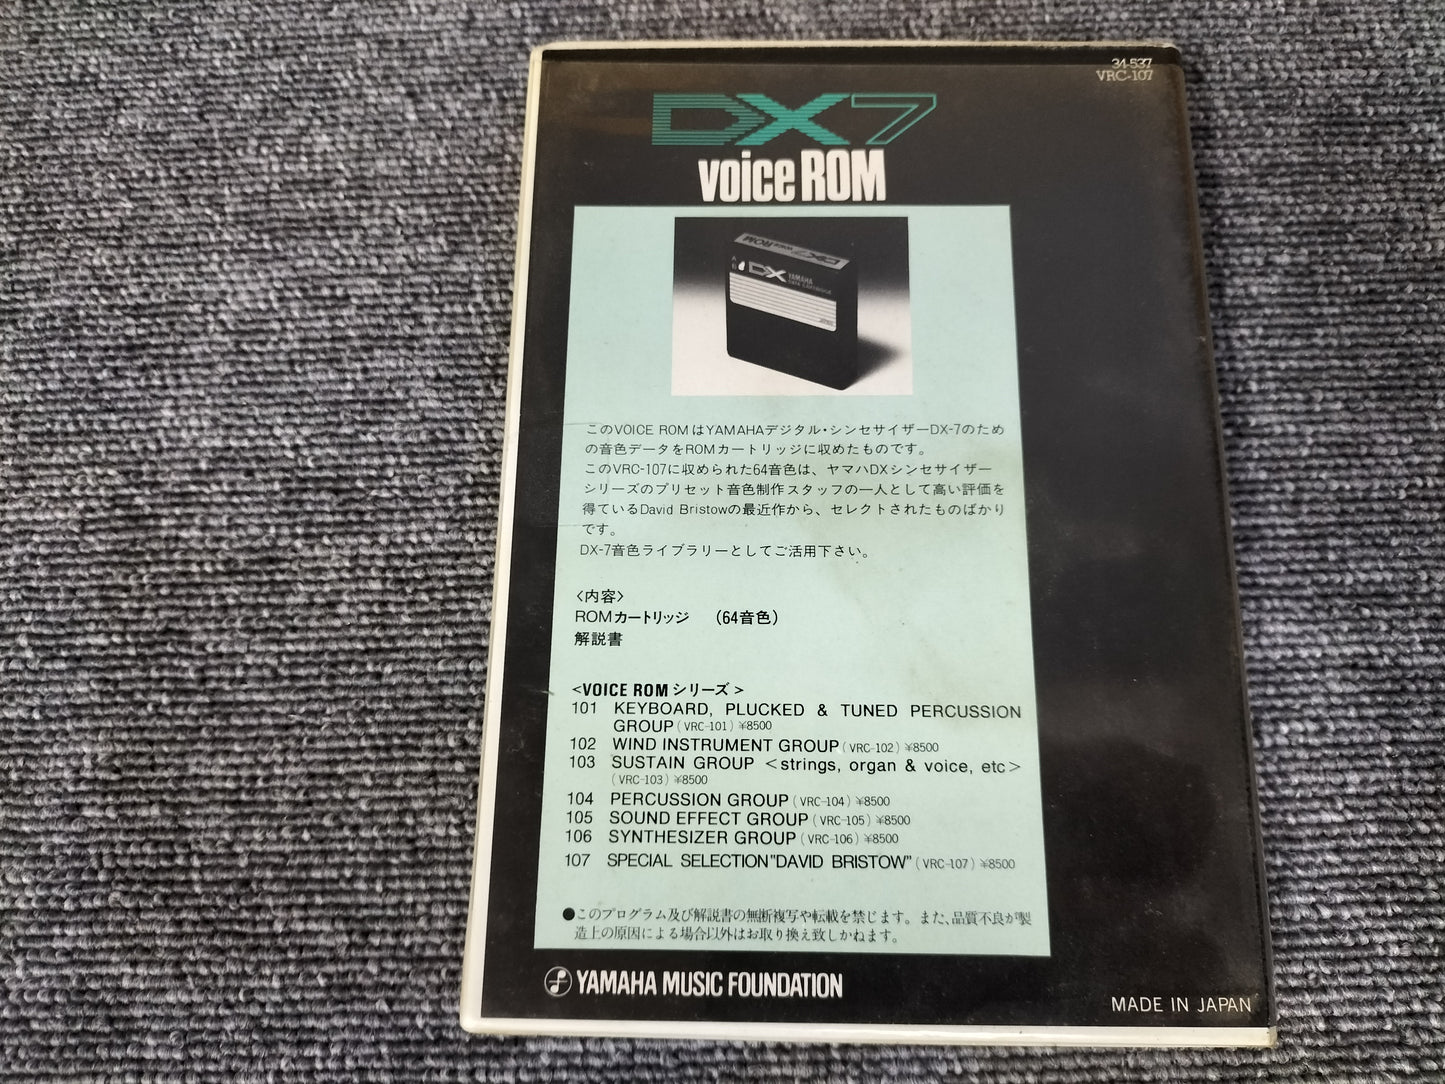 DX7カートリッジ　VoiceROM 107　SPECIAL SELECT“DAVID BRISTOW”　DX7用音源　ケース付き　O22071706